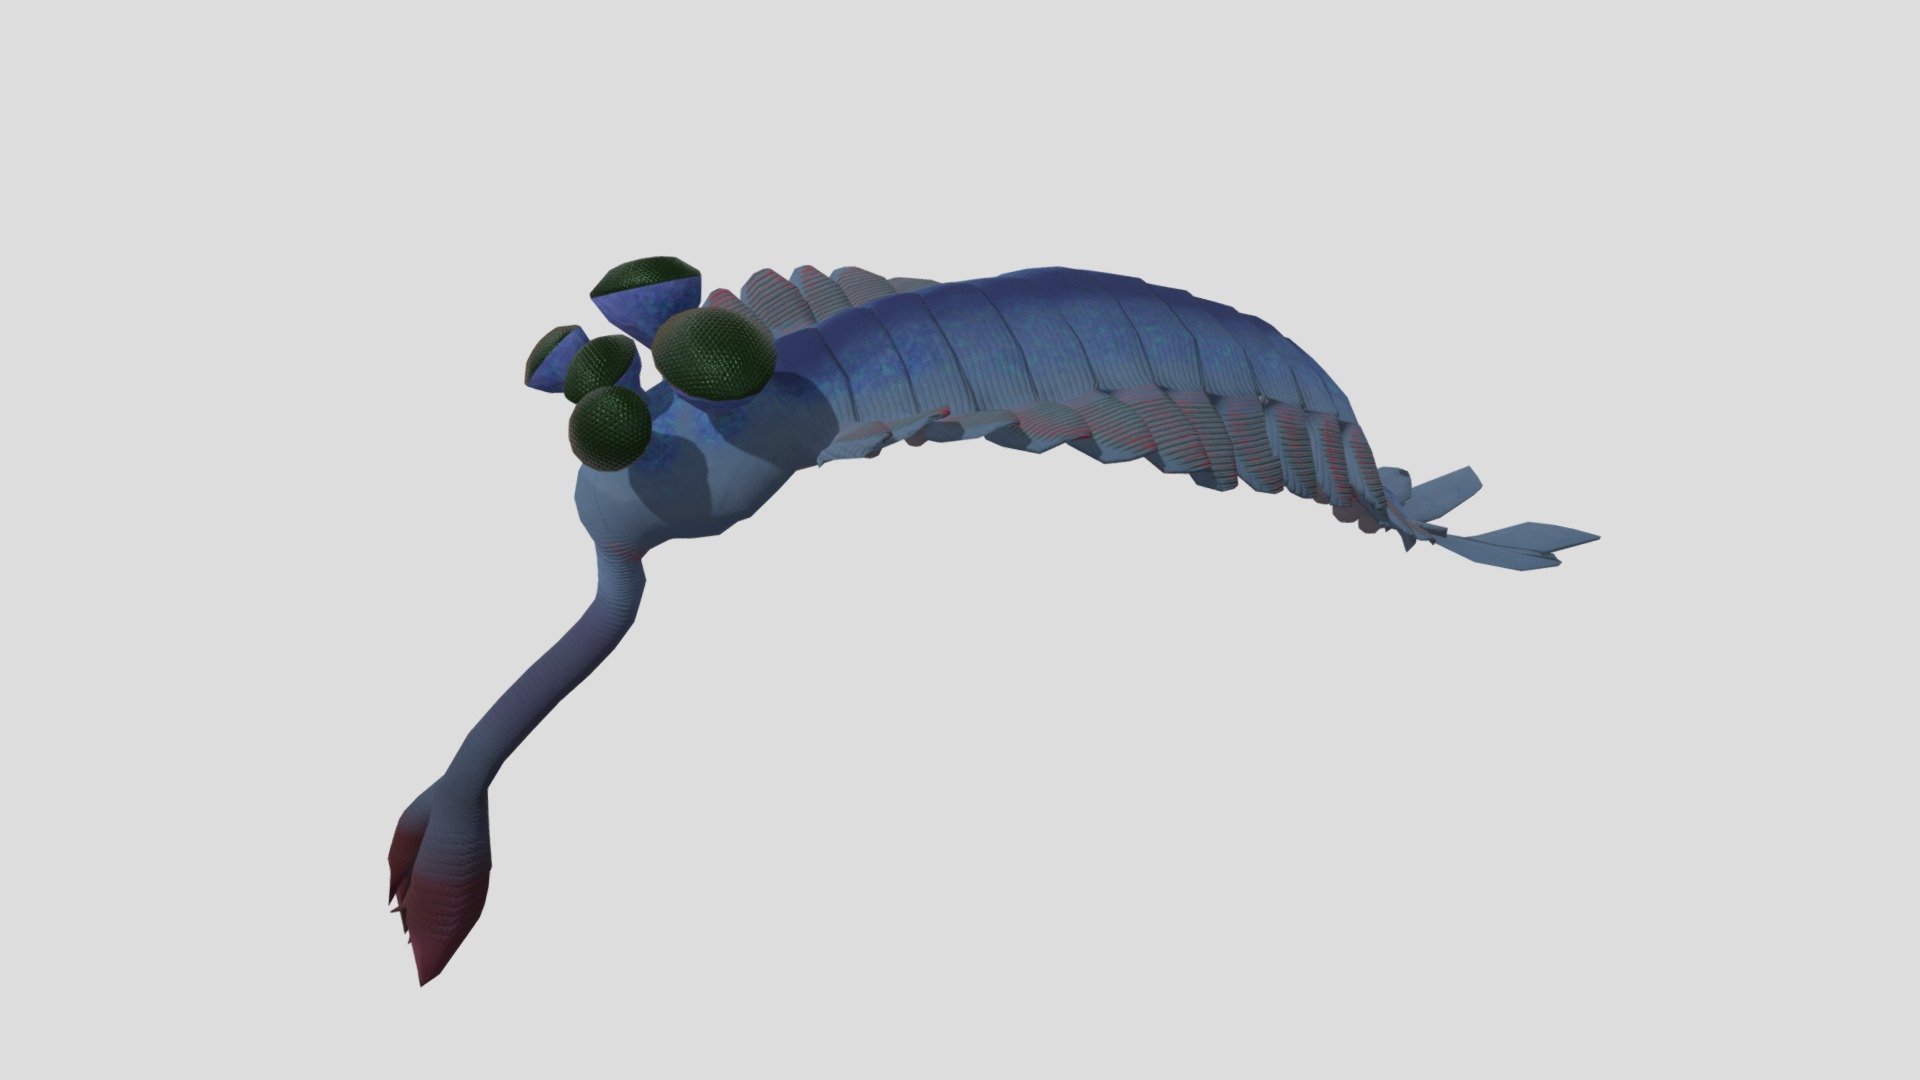 I made Opabinia! You can use it as an avatar in VRChat or cluster! You can download it at Booth! - Opabinia regalis - Download Free 3D model by カヤ（Kaya） (@hymenoptera0908) 3d model